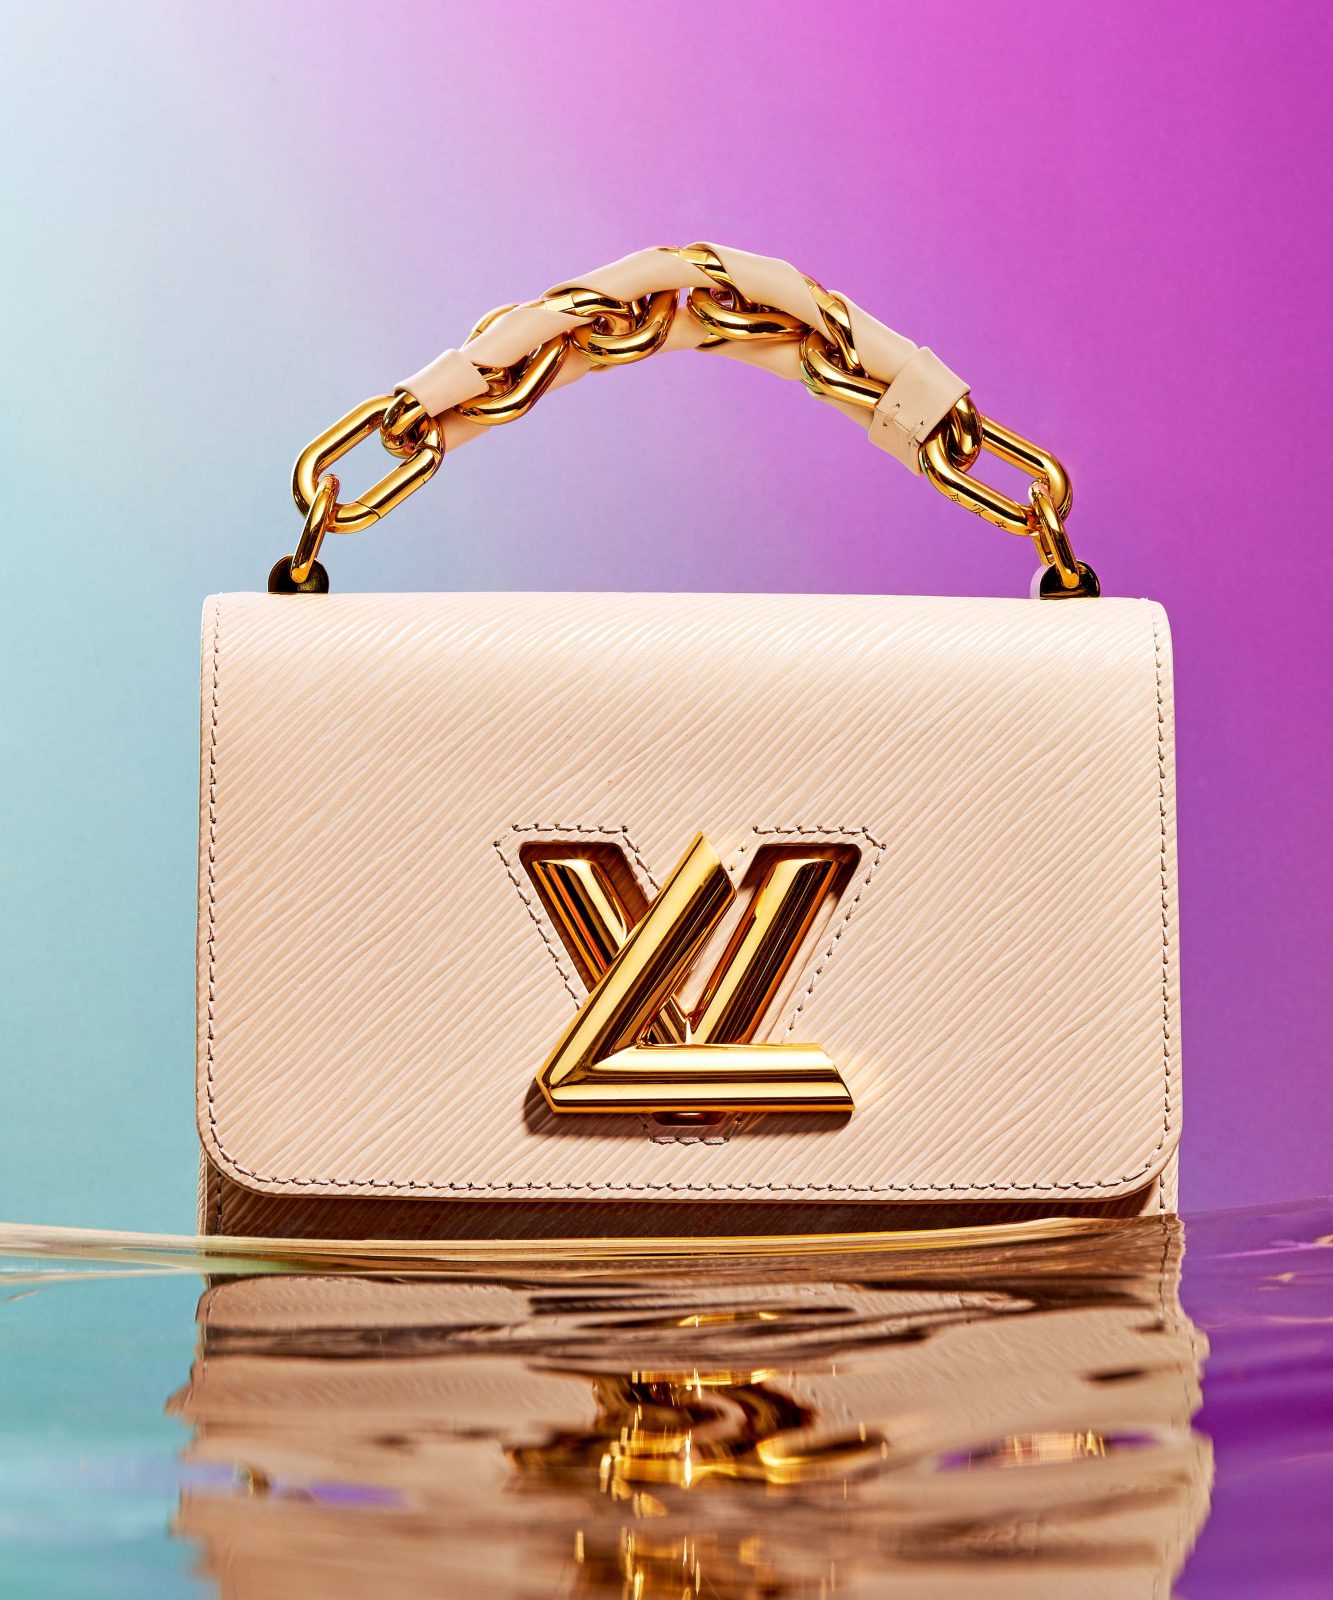 Louis Vuitton Reimagined Its Two Iconic Bag For The Essentials Collection